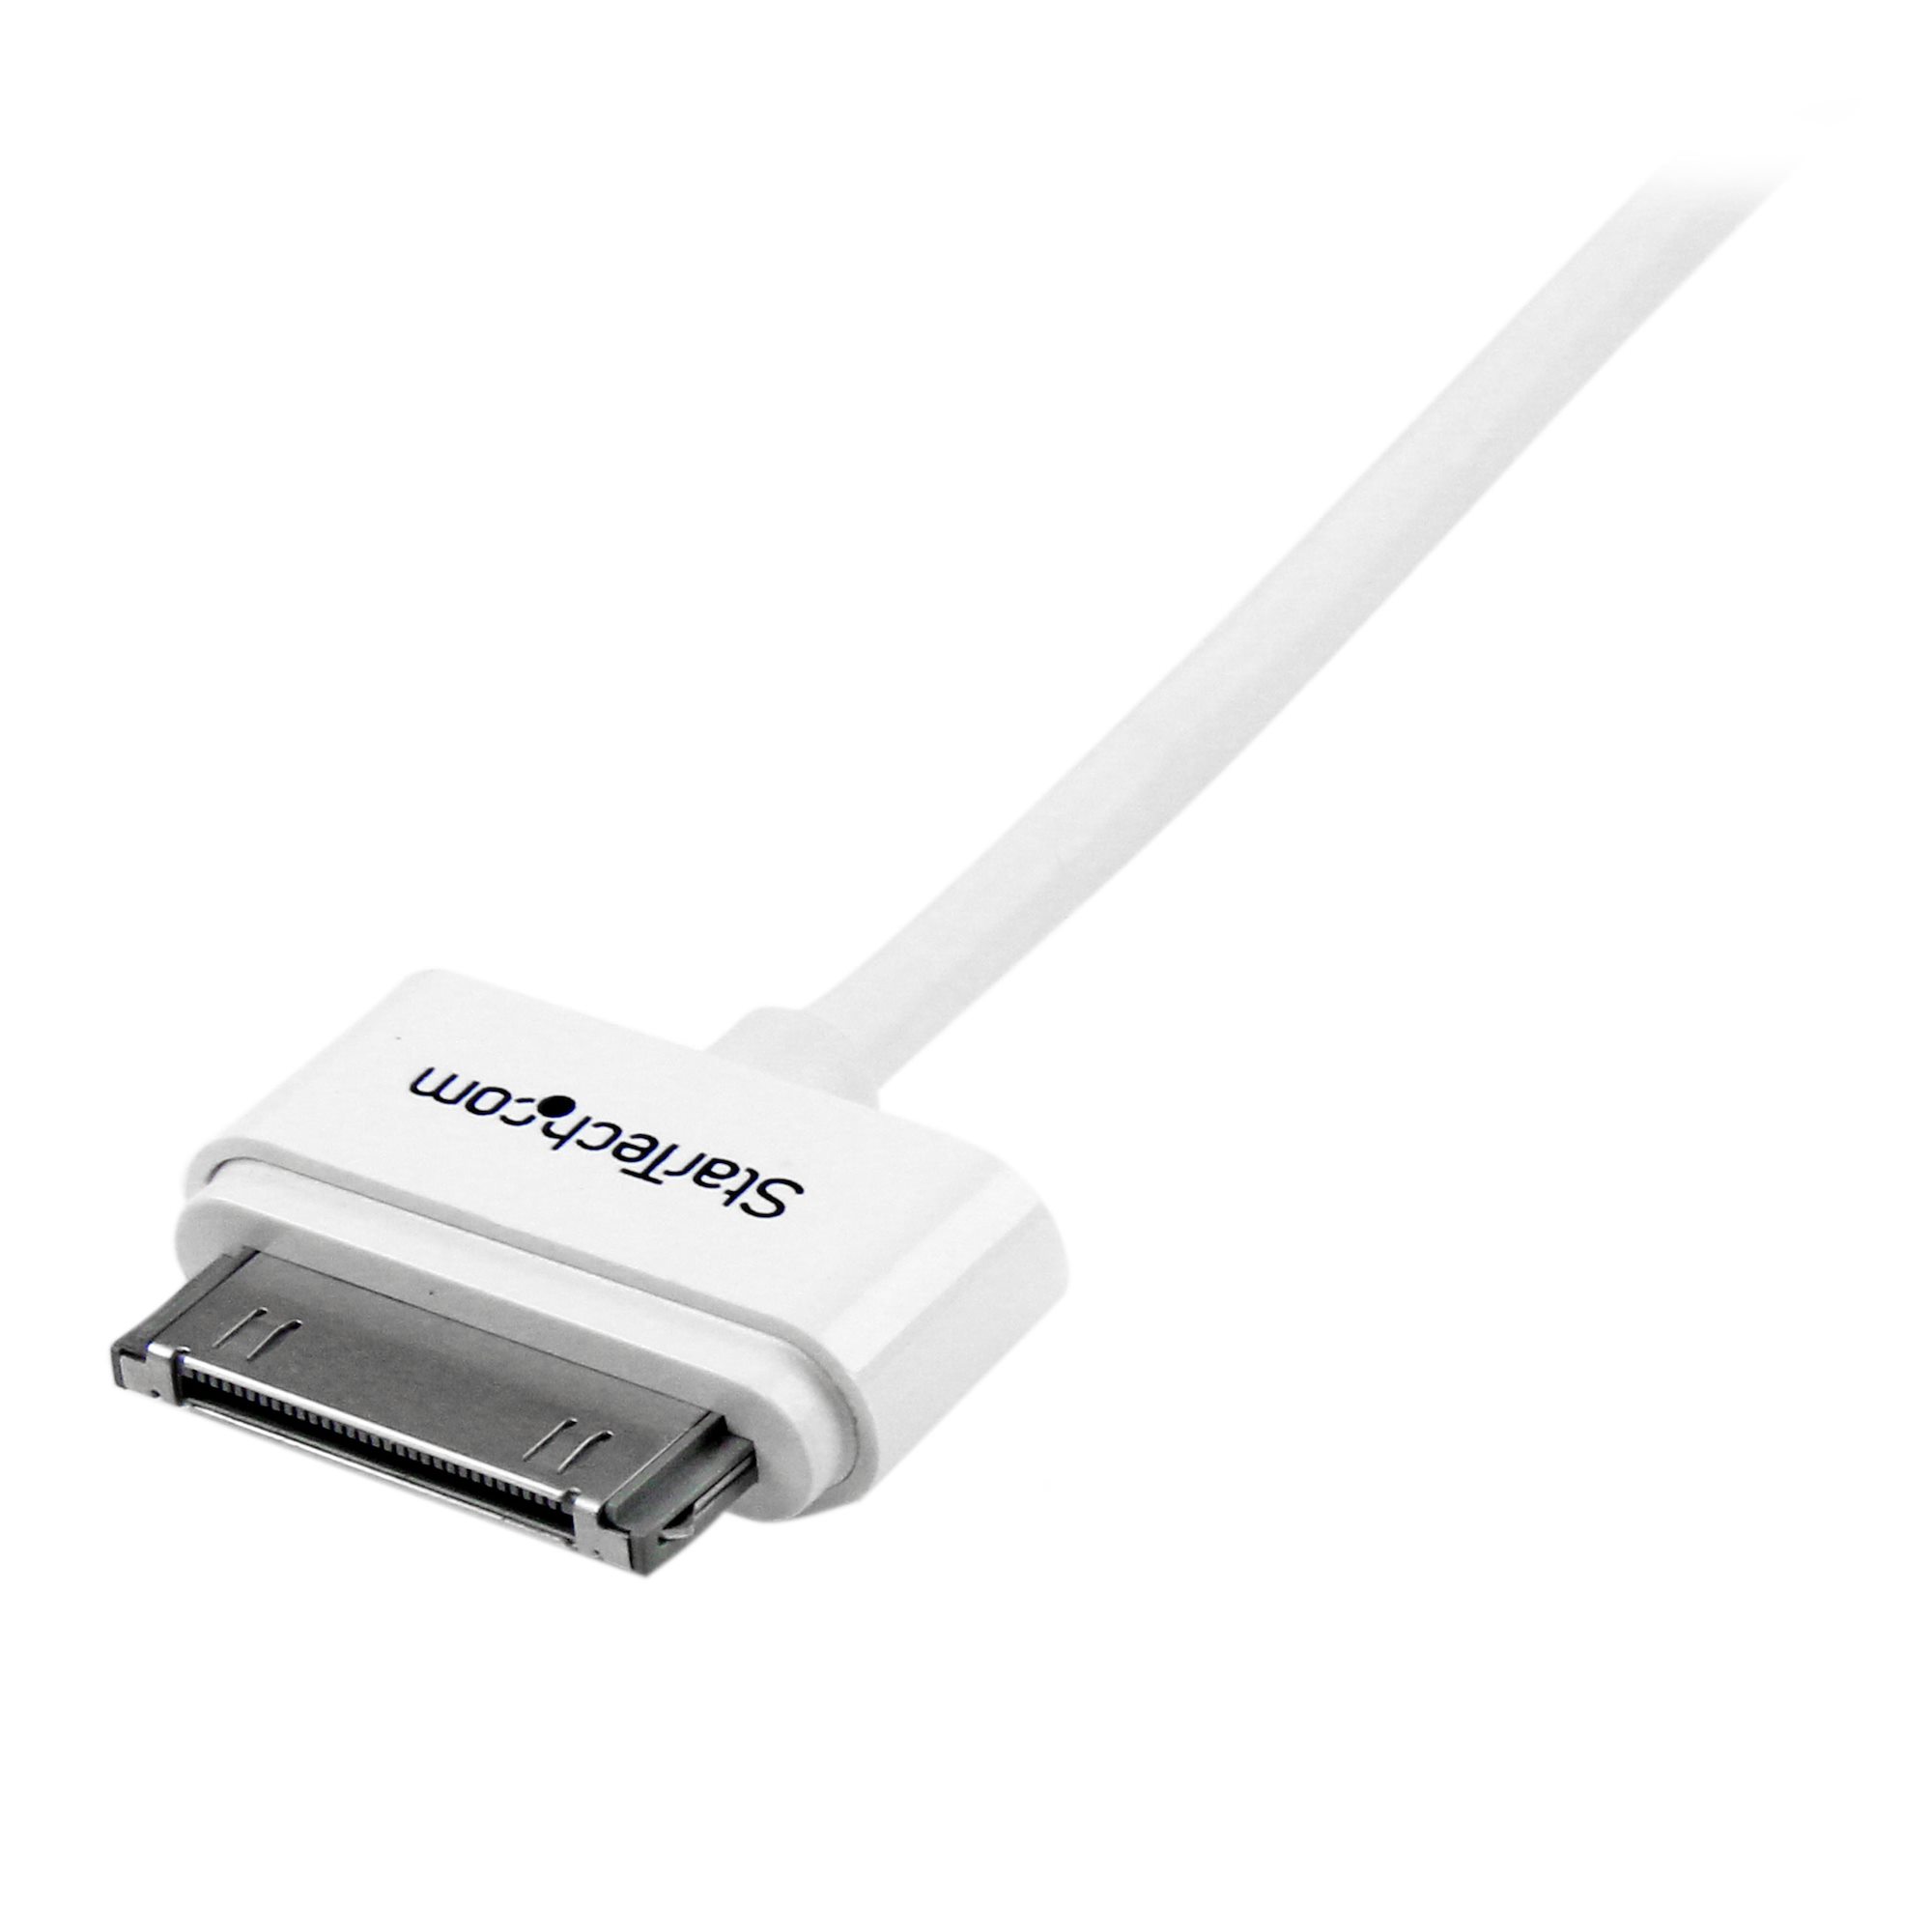 1m Apple® Dock to USB Cable - 30-pin Dock Connector for iPod, iPhone and iPad | StarTech.com